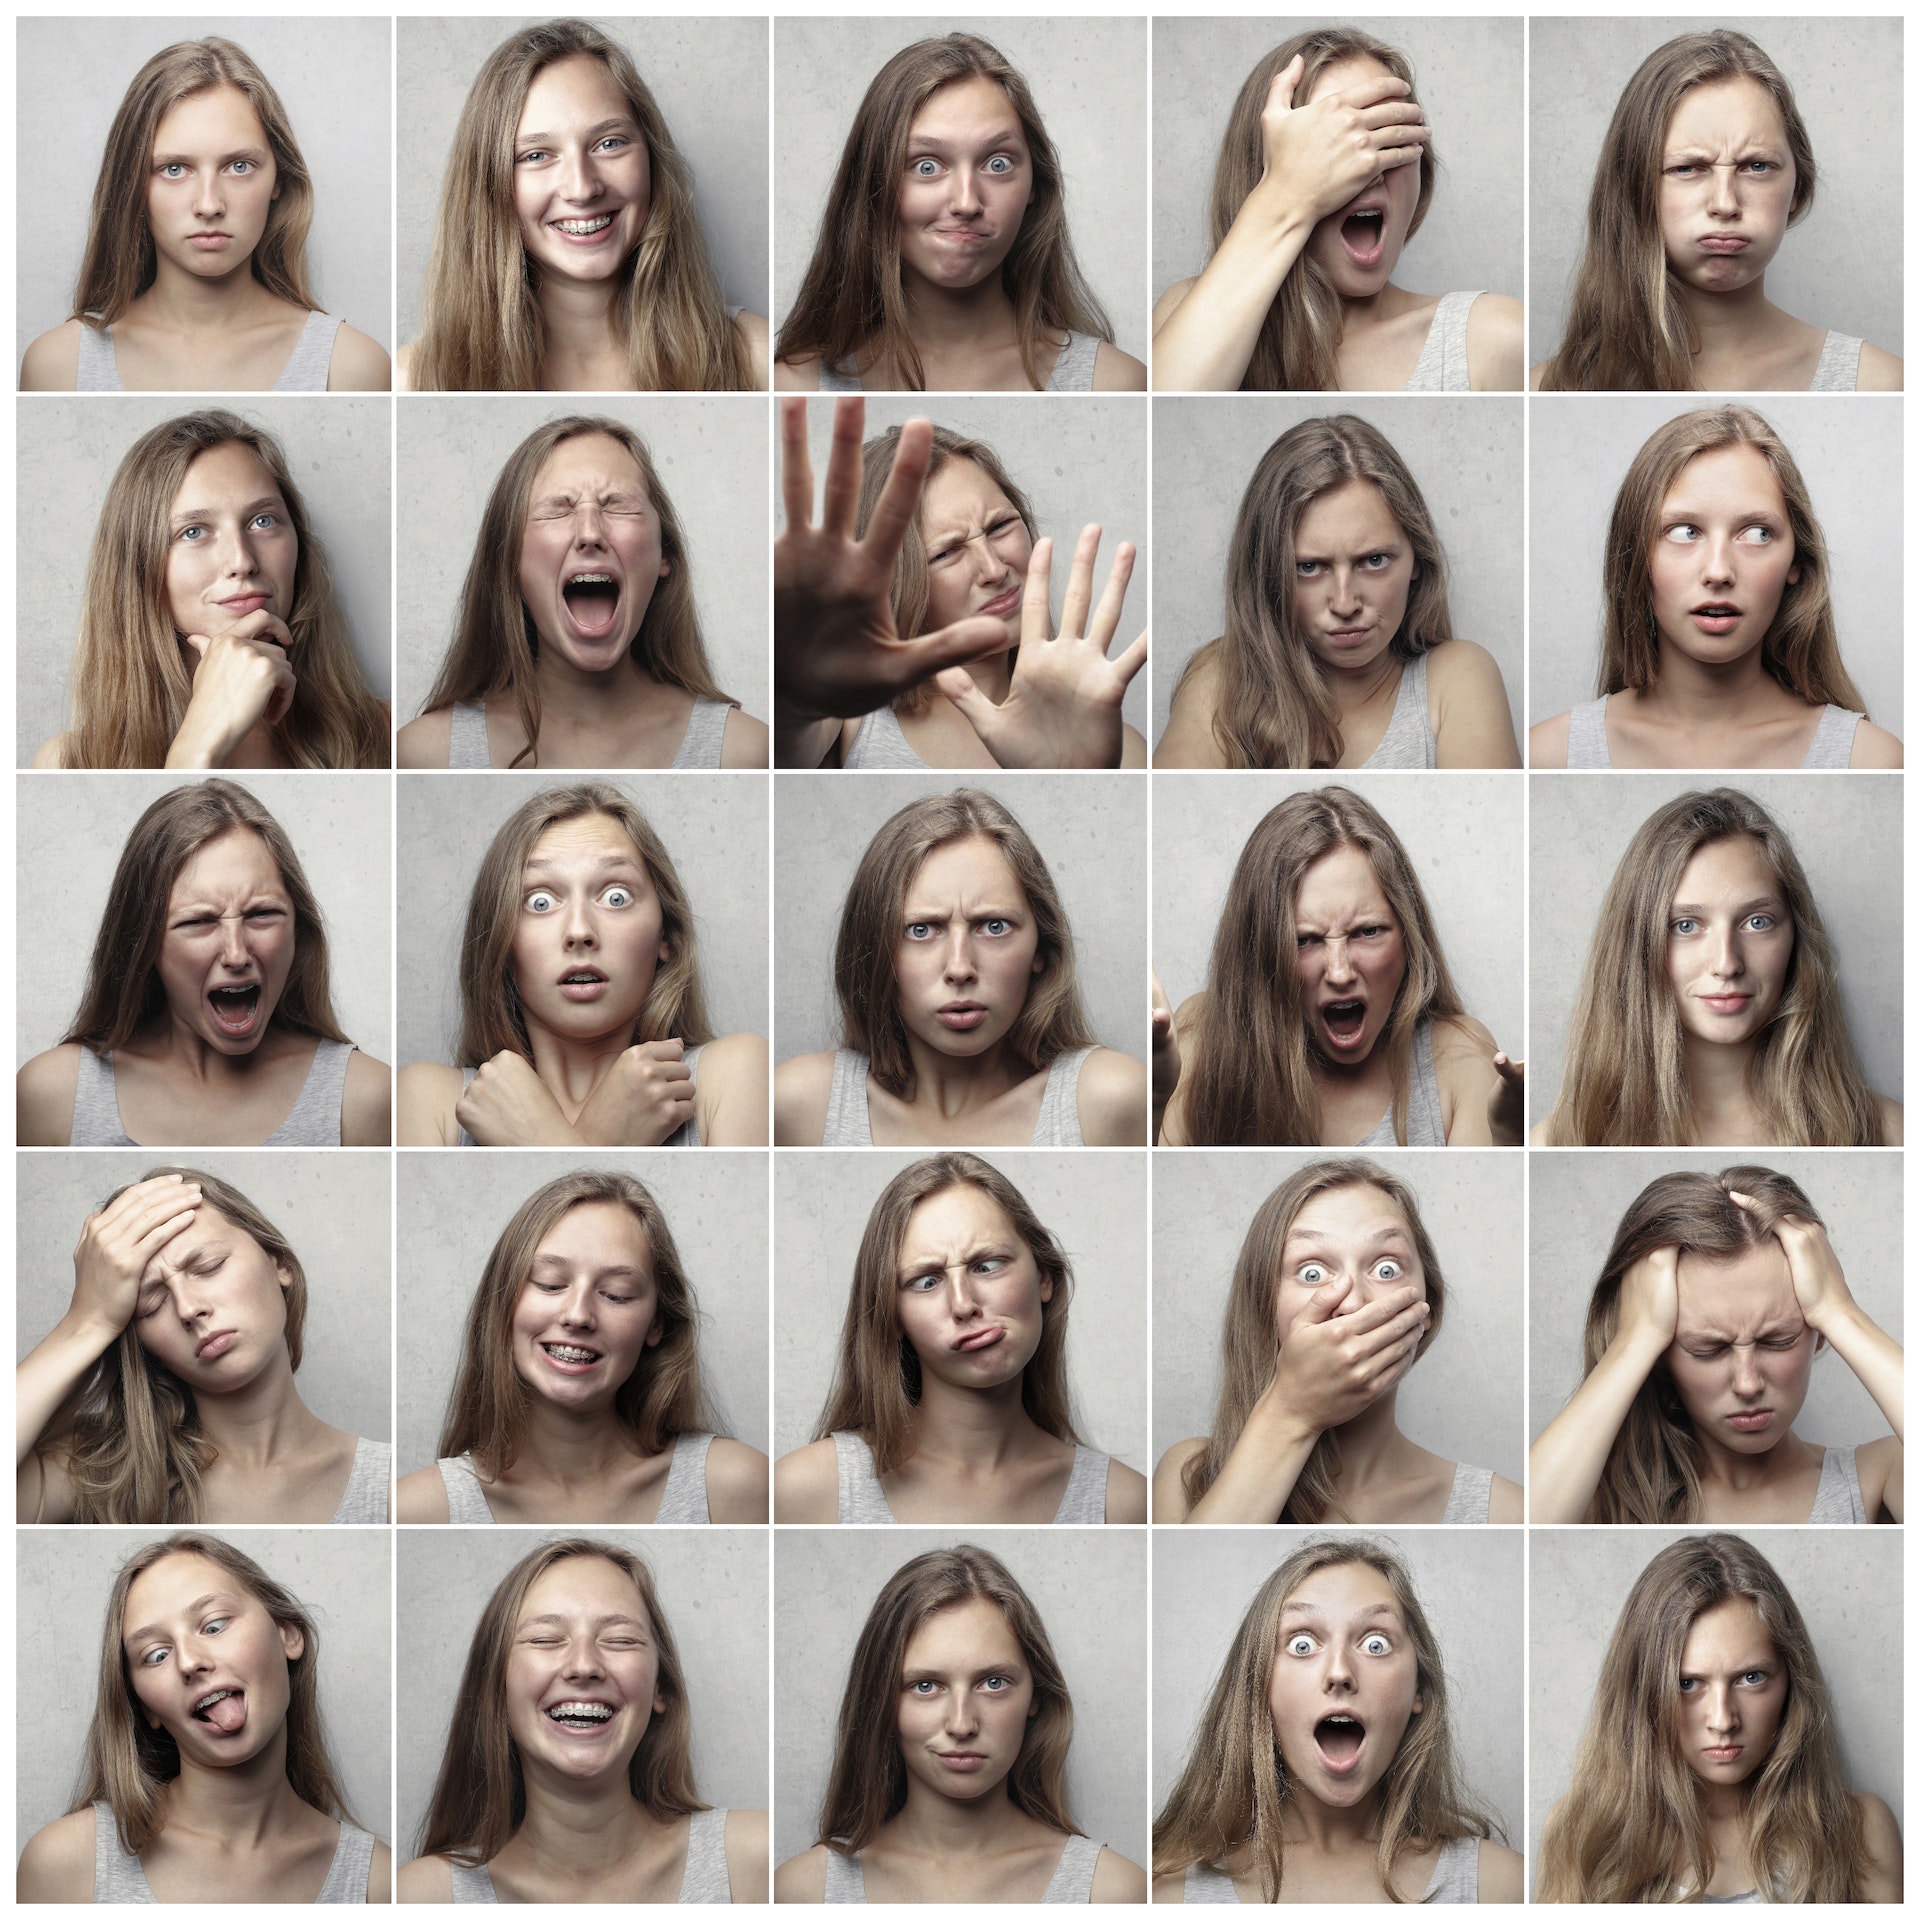 Woman expressing different emotions